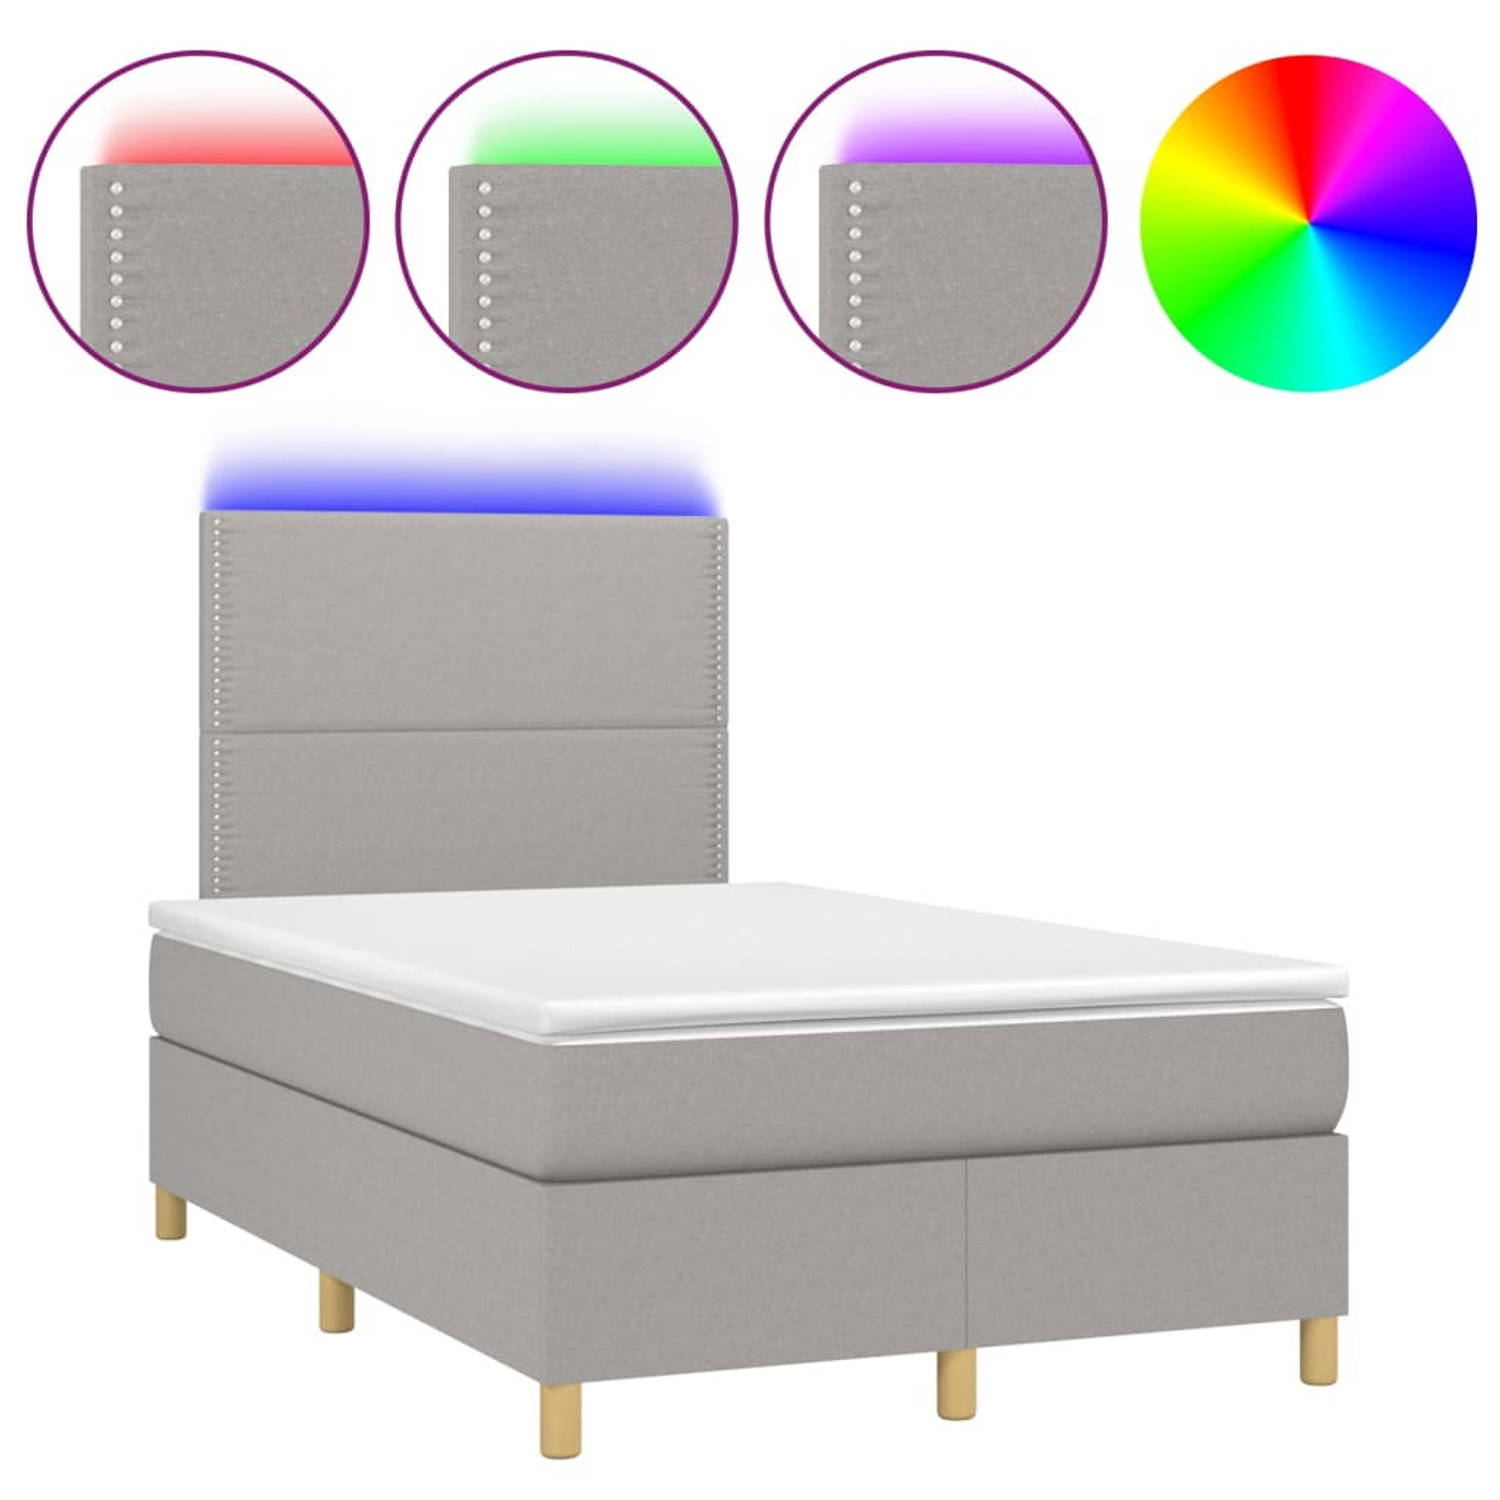 The Living Store Boxspring met matras en LED stof lichtgrijs 120x200 cm - Boxspring - Boxsprings - Bed - Slaapmeubel - Boxspringbed - Boxspring Bed - Tweepersoonsbed - Bed Met Matr